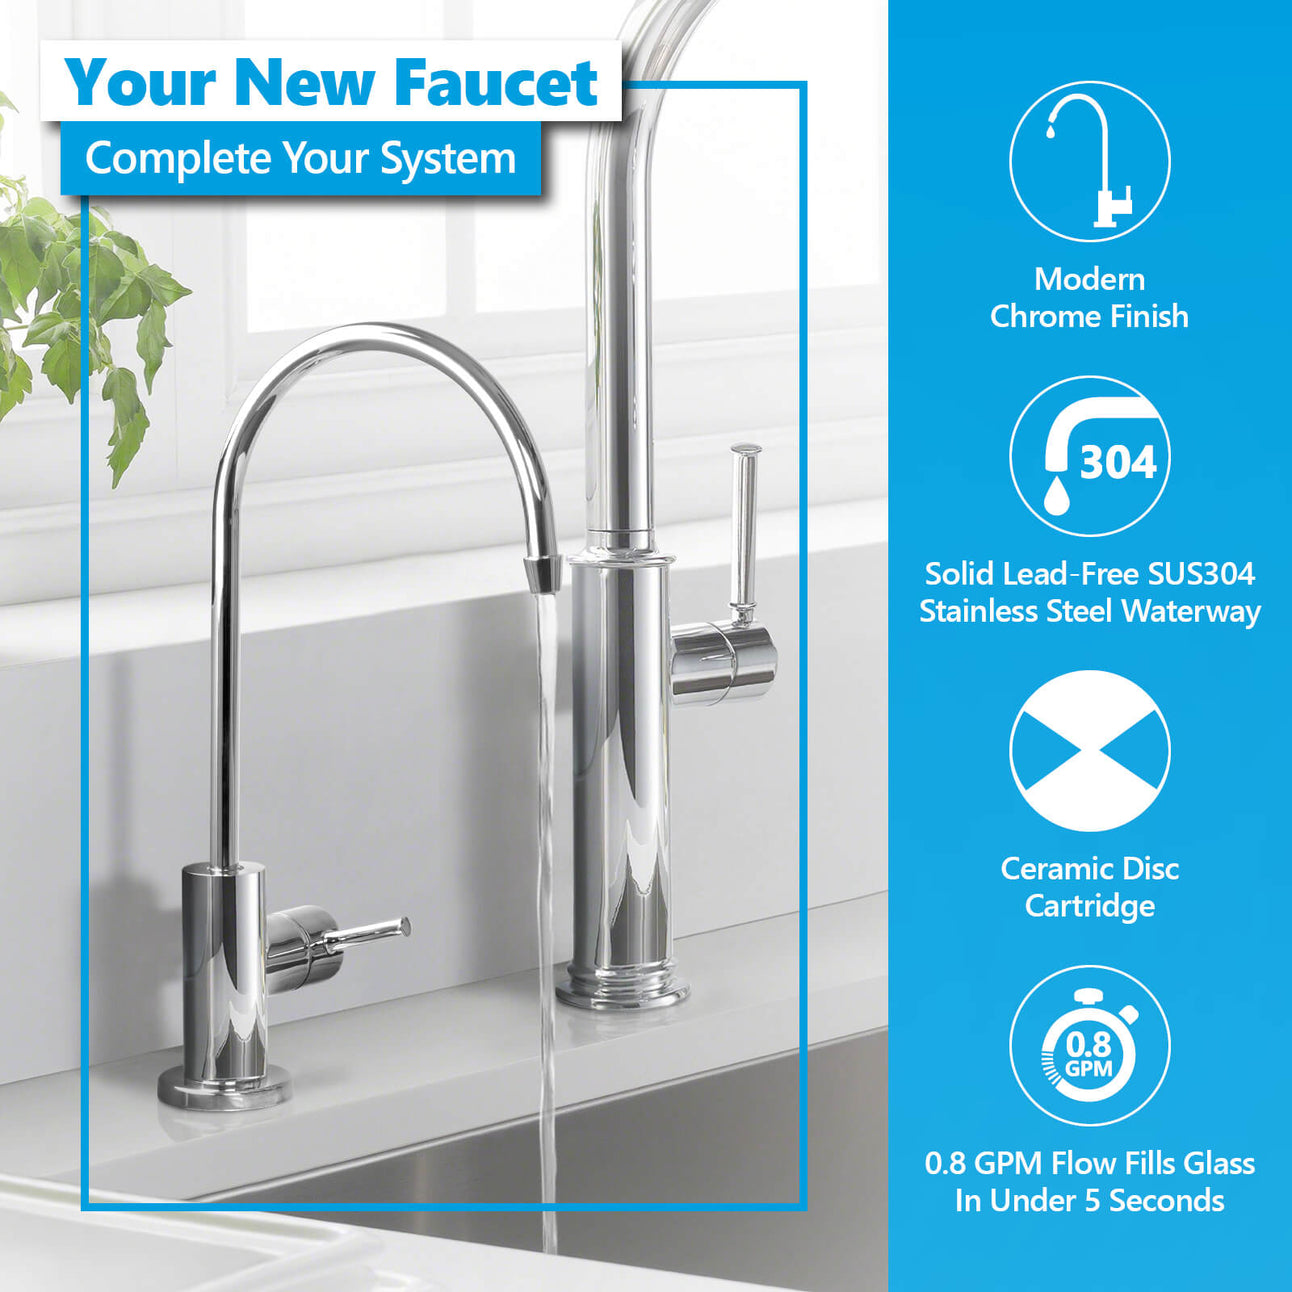 Express Water Deluxe Water Filter Faucet – Chrome Coke-Shaped Faucet –